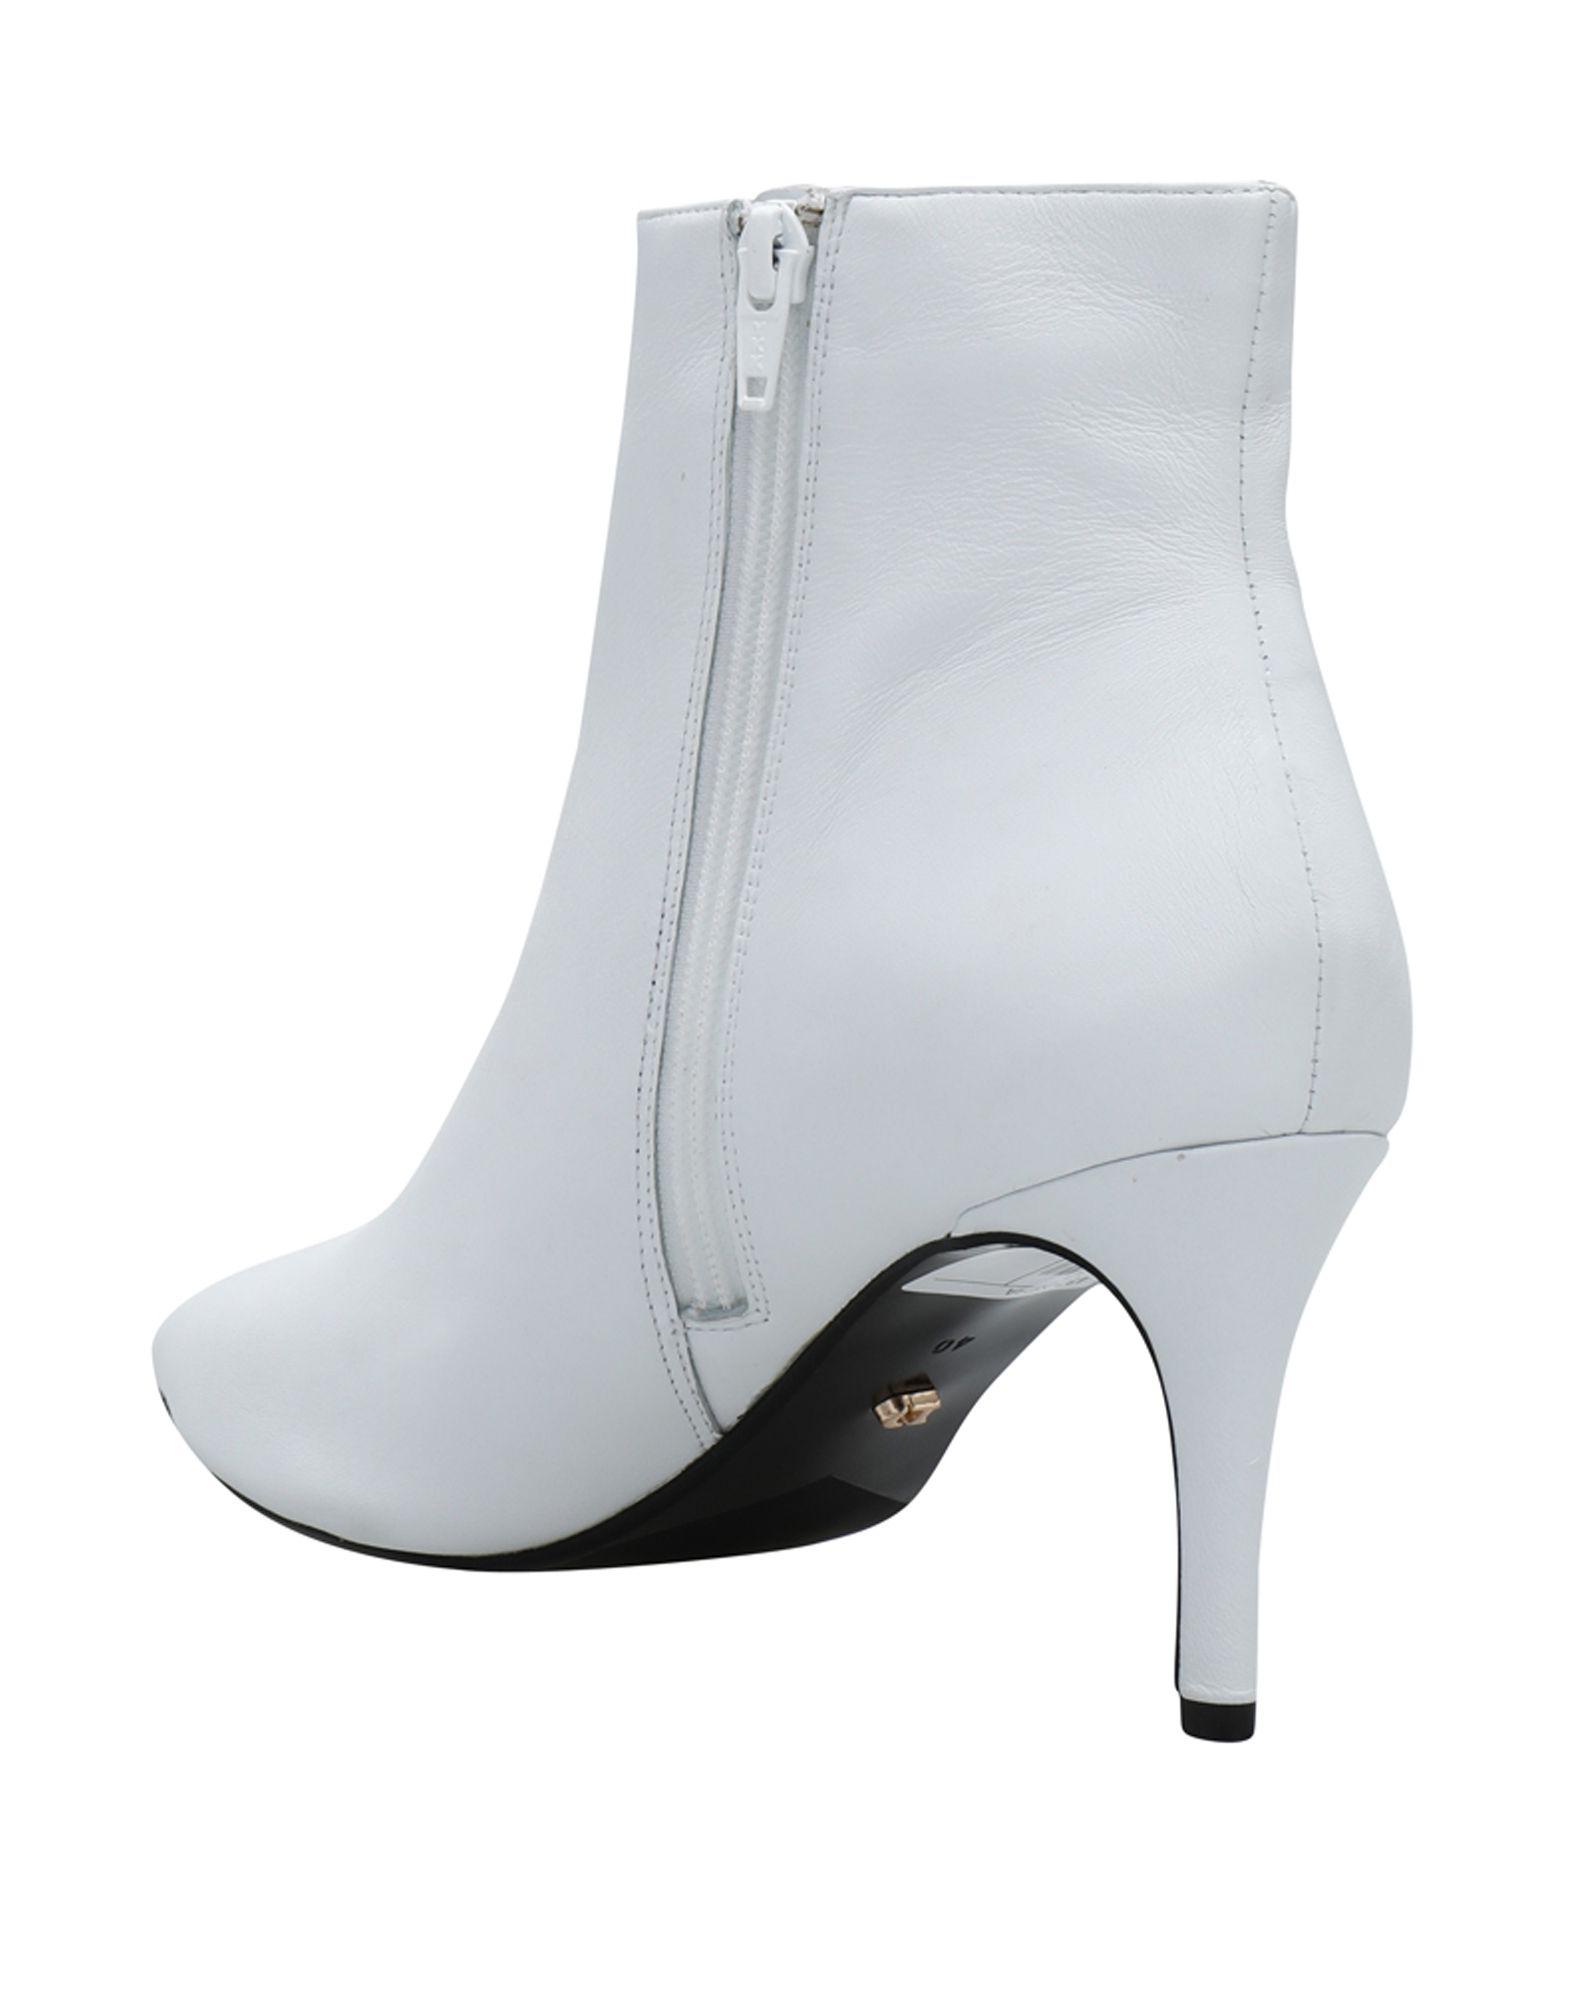 Dune Leather Ankle Boots in White - Lyst